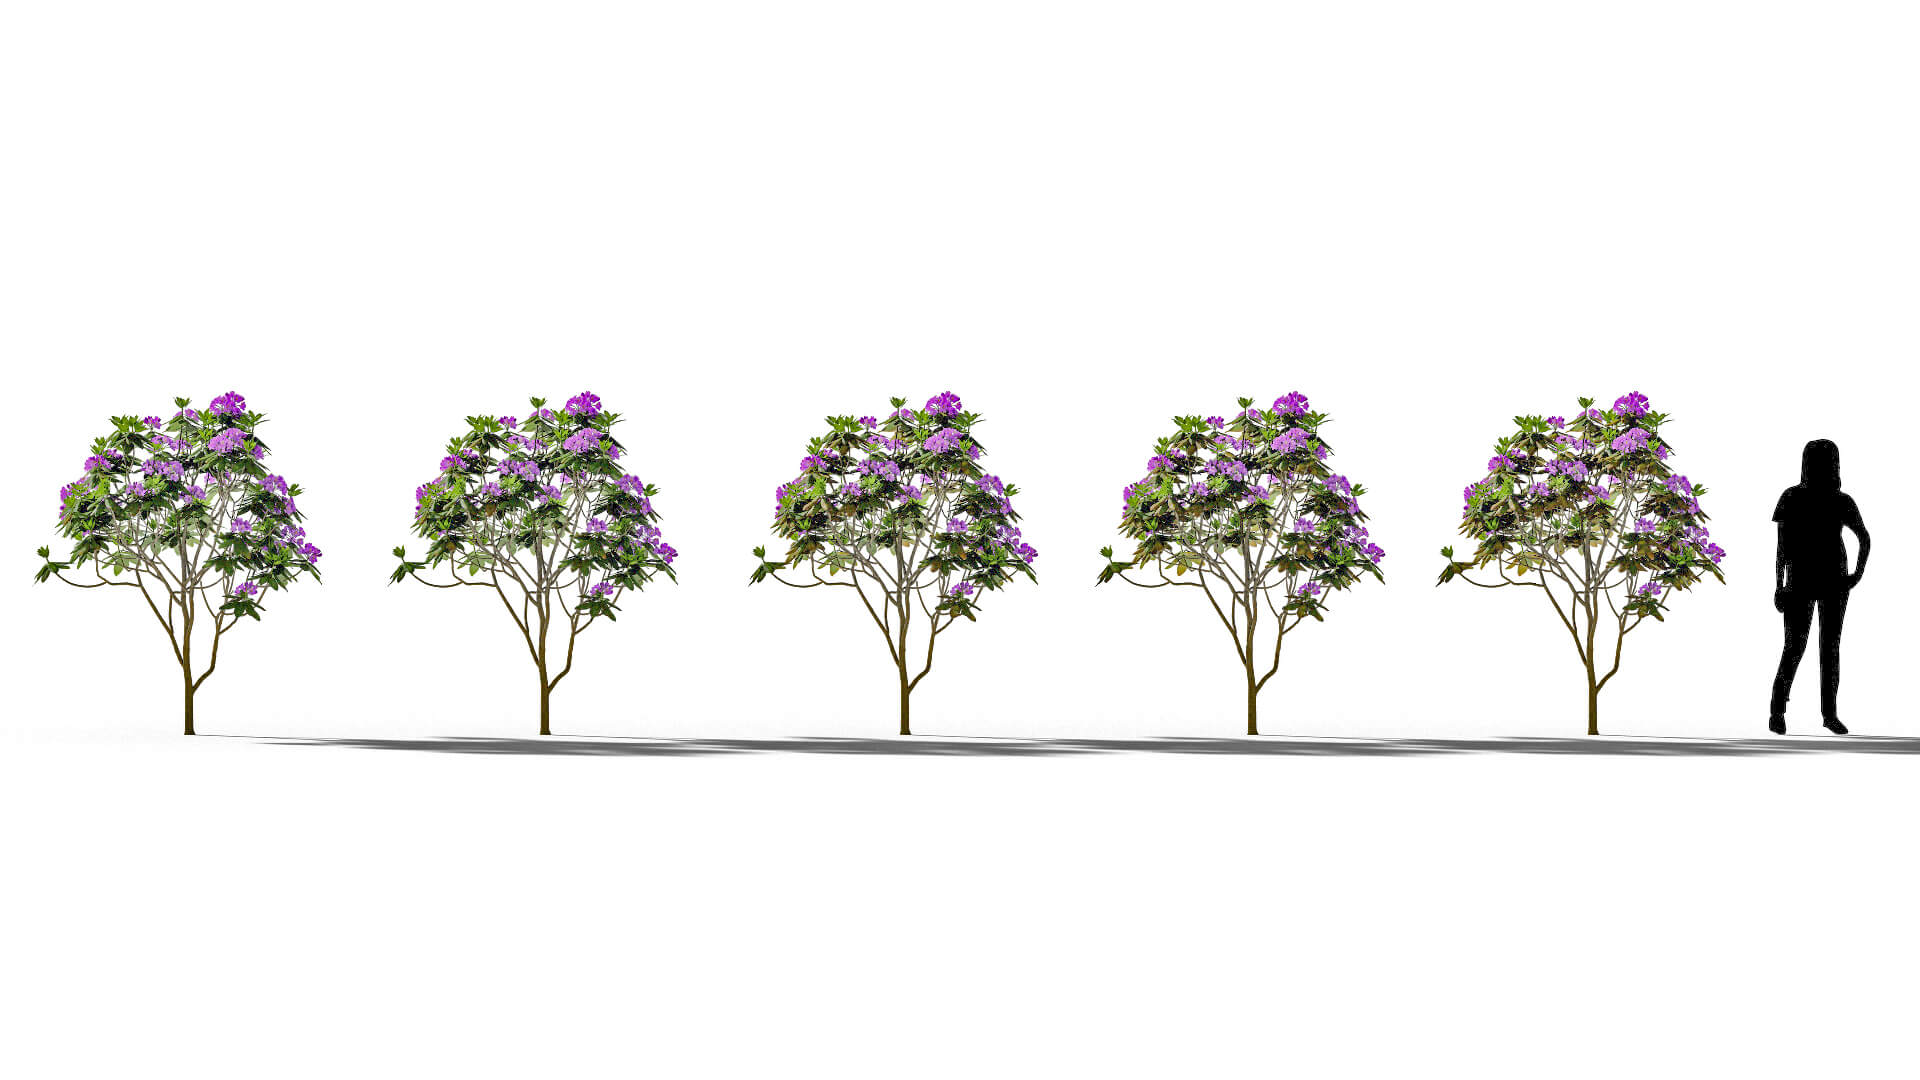 3D model of the Rhododendron Everestianum Rhododendron 'Everestianum' health variations